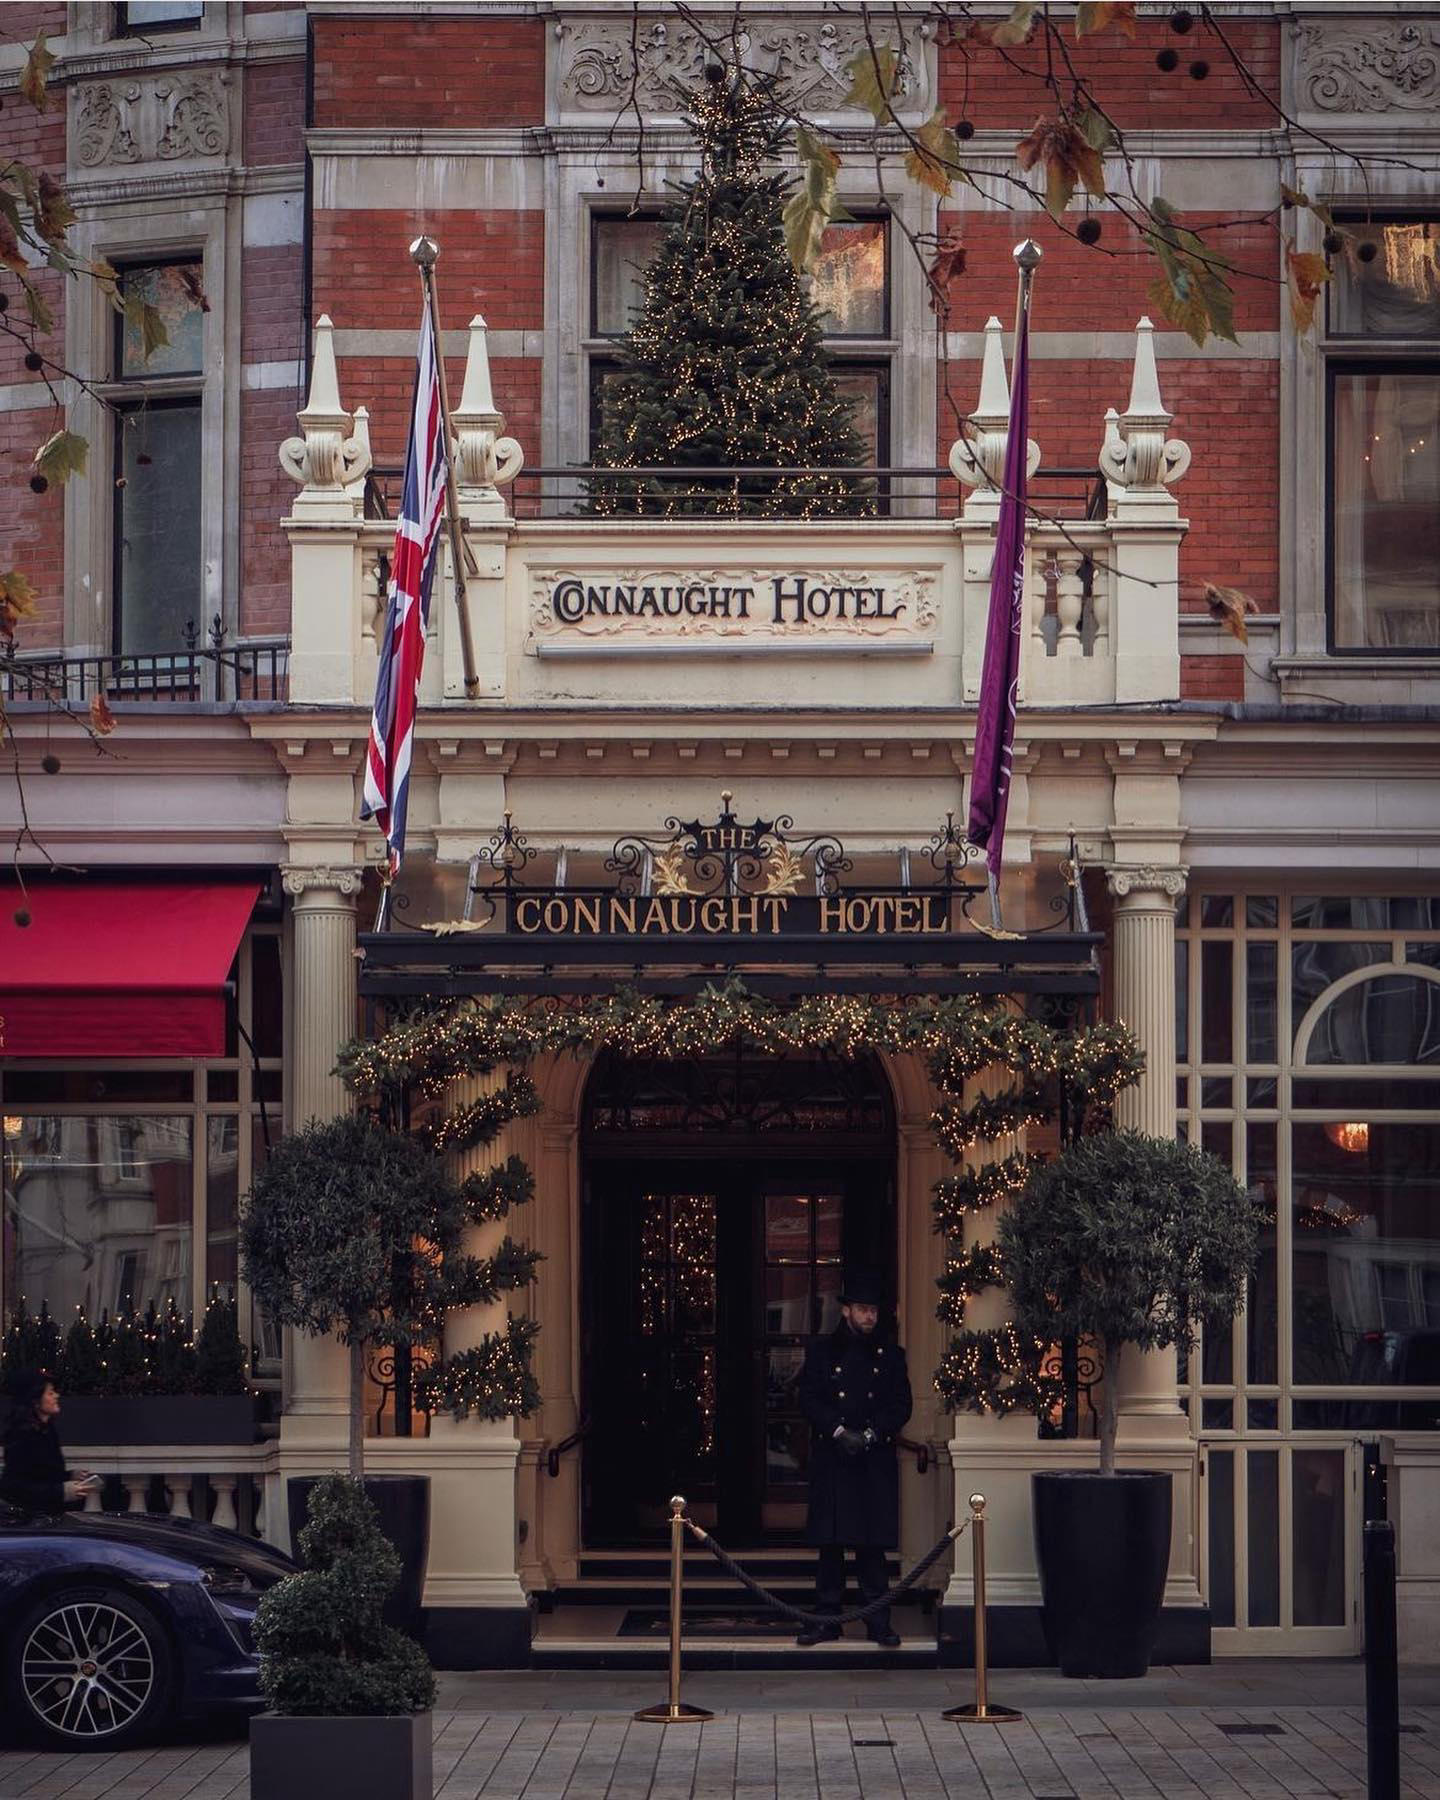 image  1 The Connaught - Happy Friday from our festive entrance beautifully captured by #elaineblackall